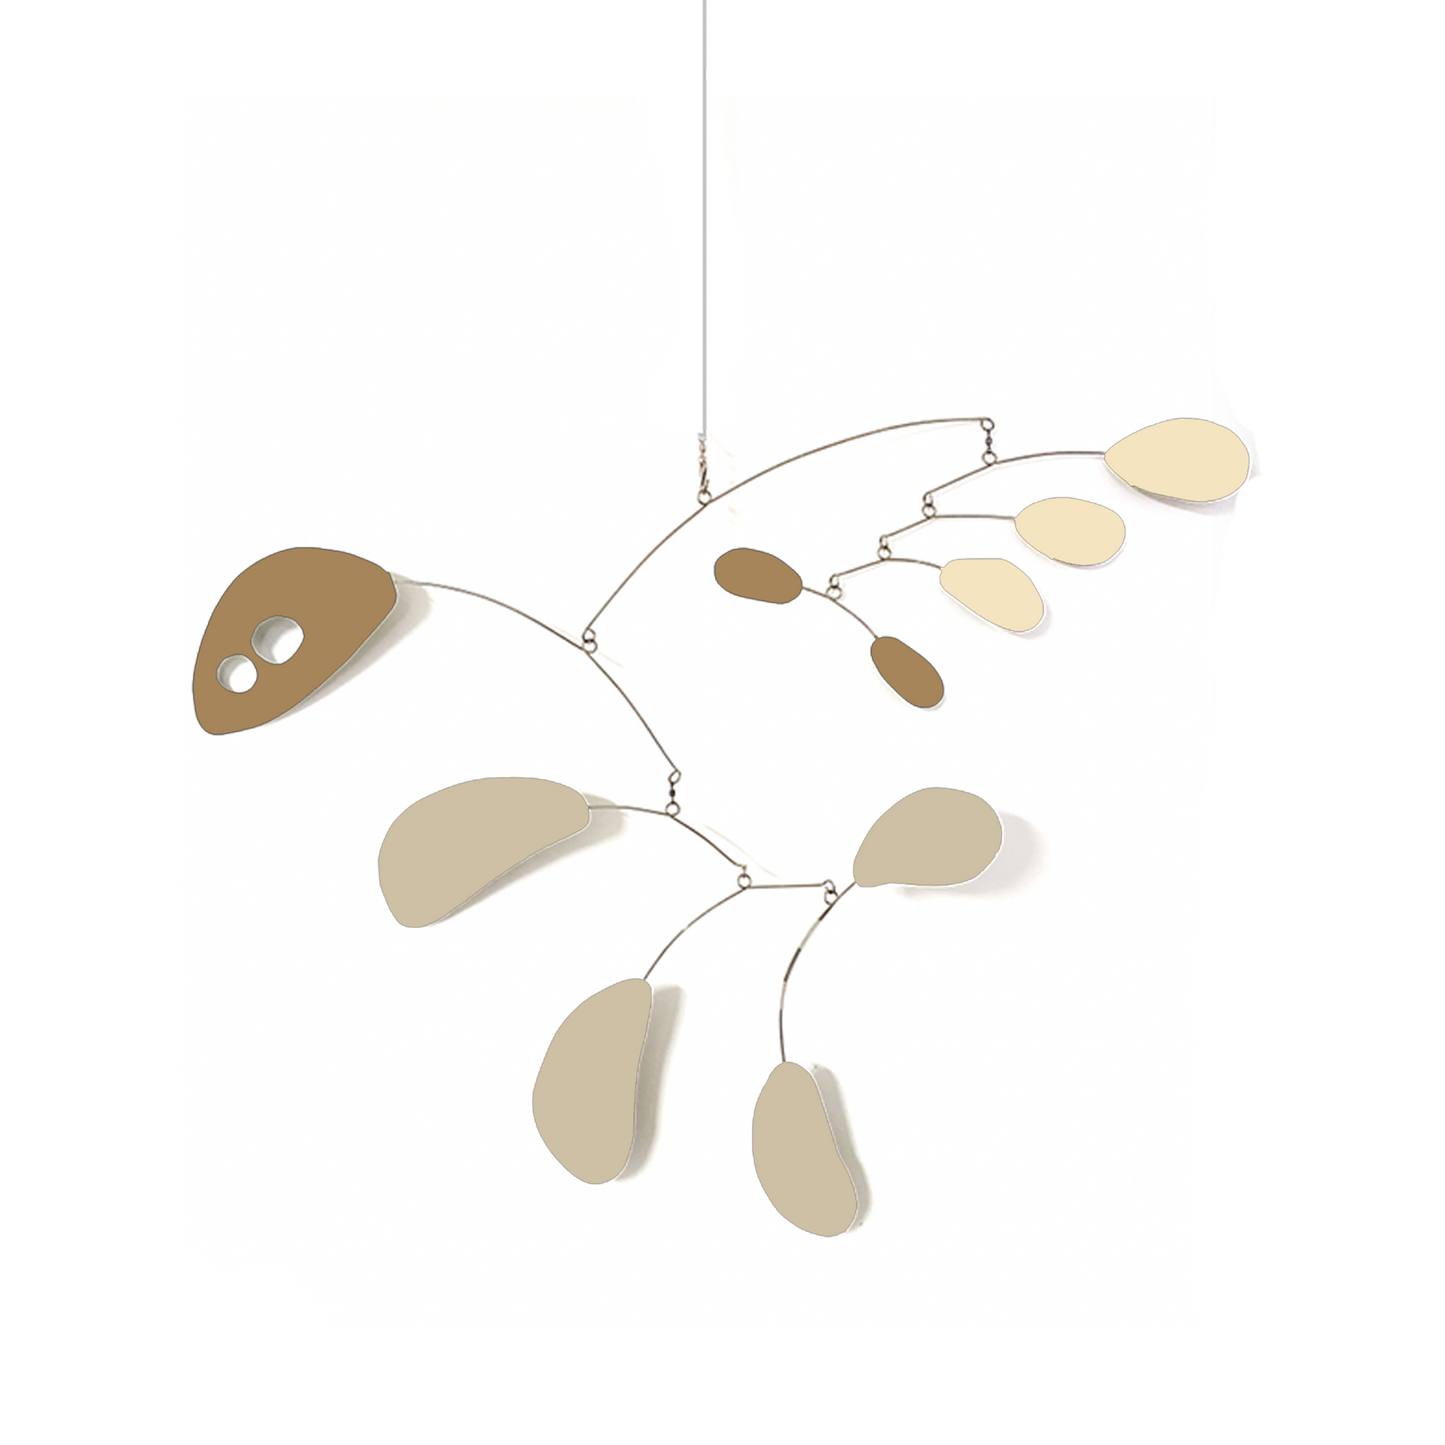 ModCat Mid Century Modern Kinetic Hanging Art Mobile in shades of tan beige by AtomicMobiles.com